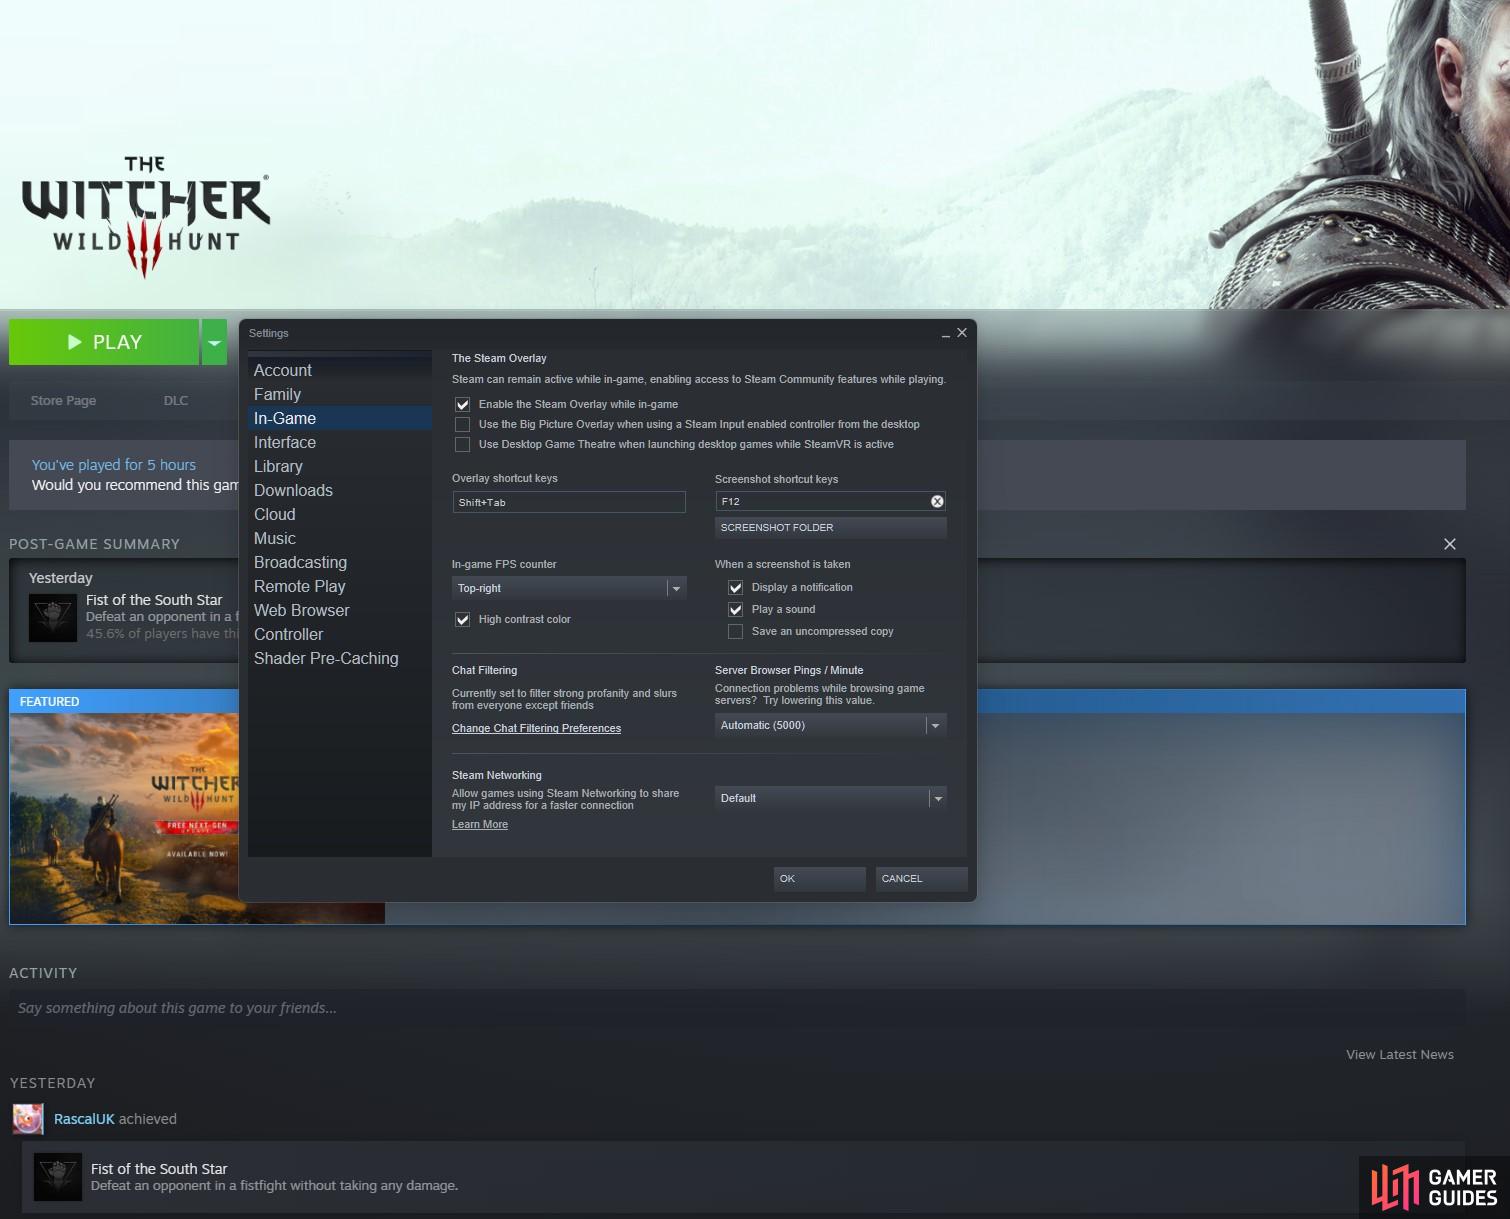 The Steam FPS counter does not seem to work at this early stage.